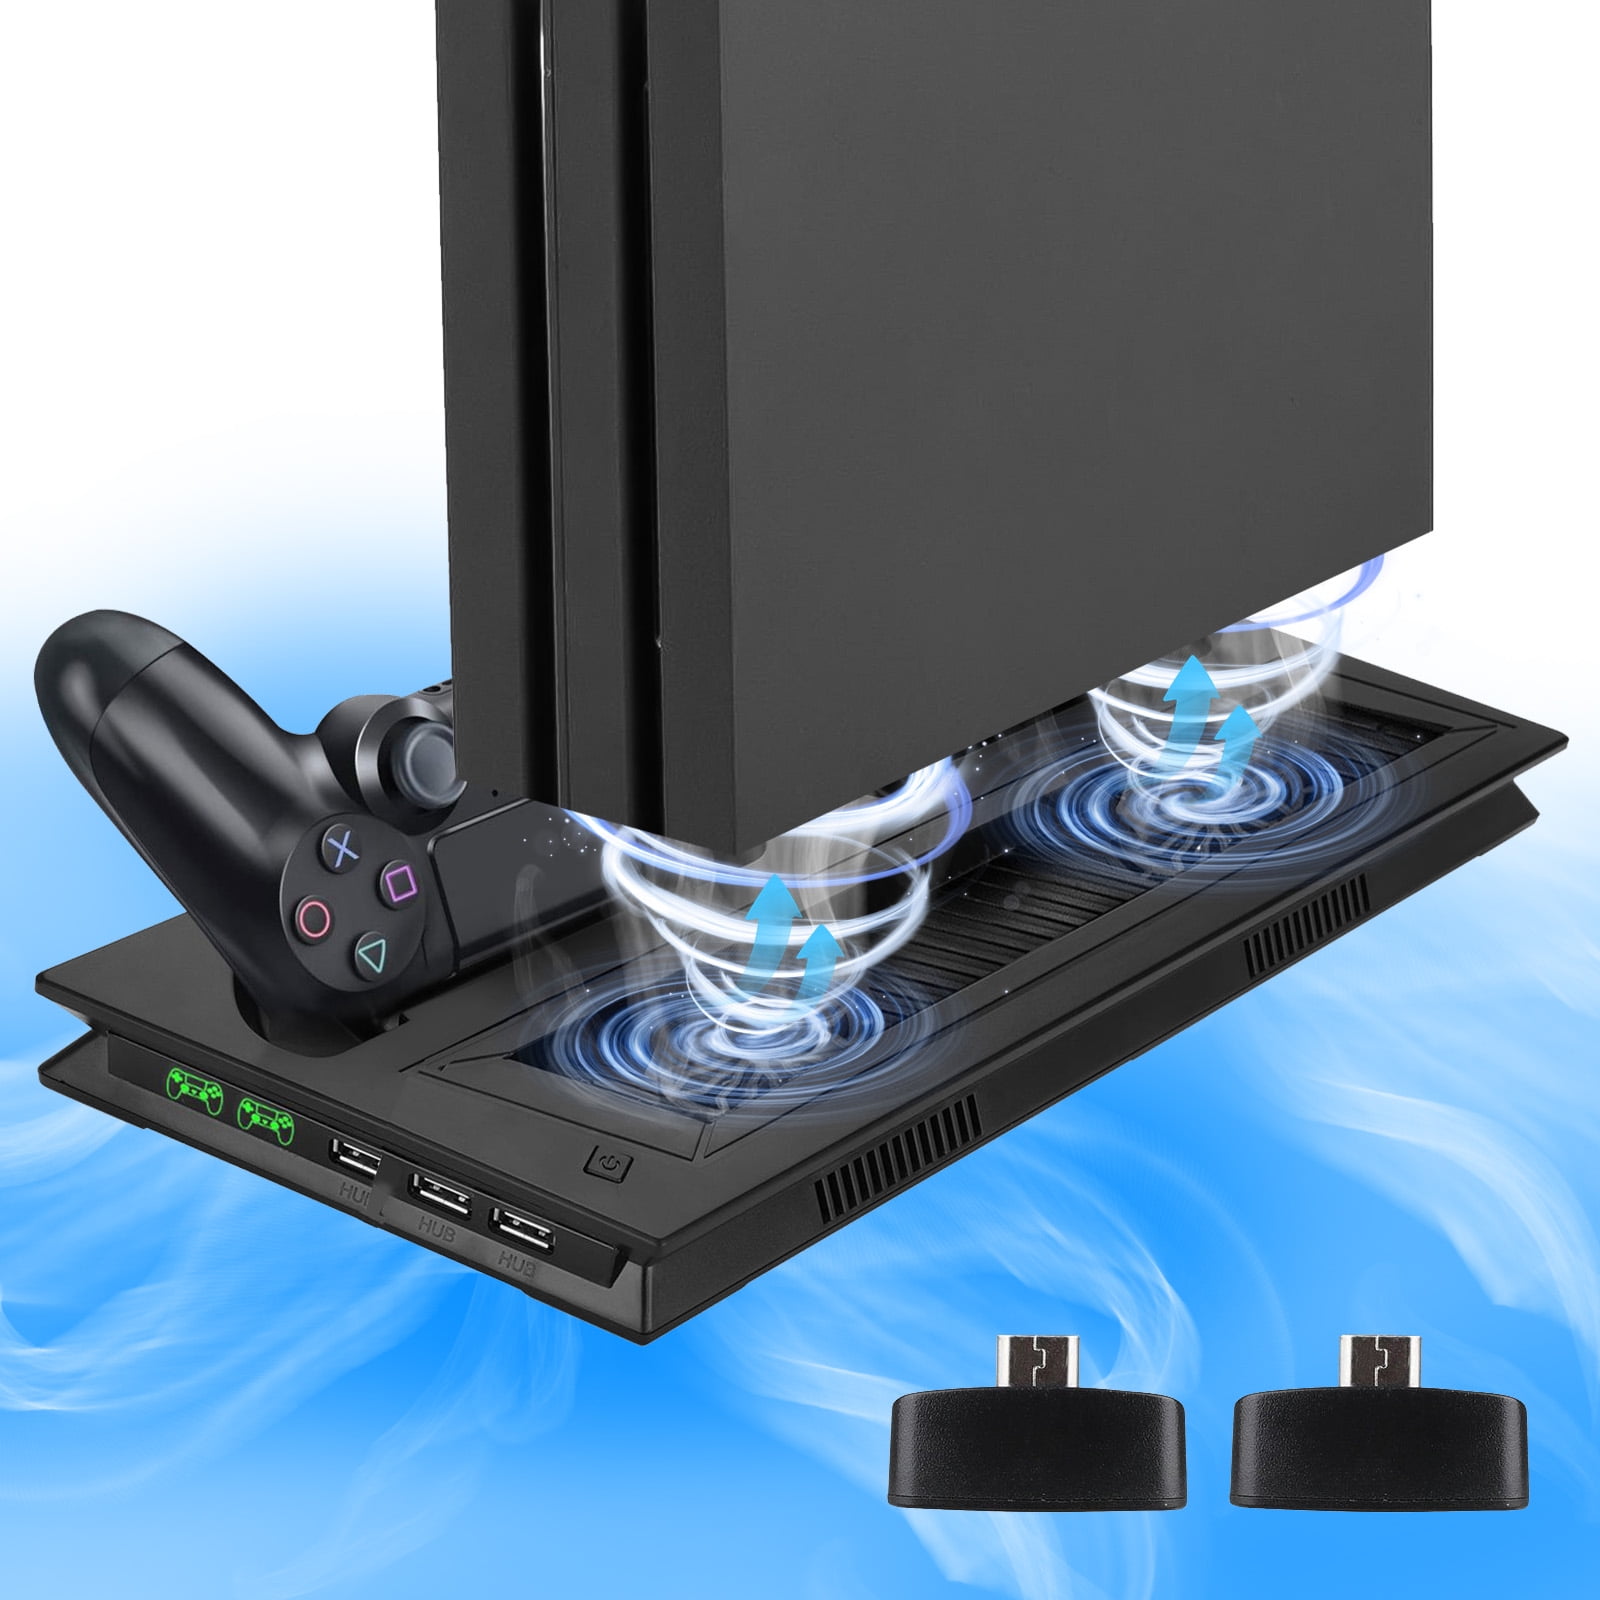  Dobe PS4 Pro Dual Charging Dock Veritcal Stand USB HUB with  Cooling Fan for Sony PlayStation 4 Pro and PS4 Slim System : Video Games